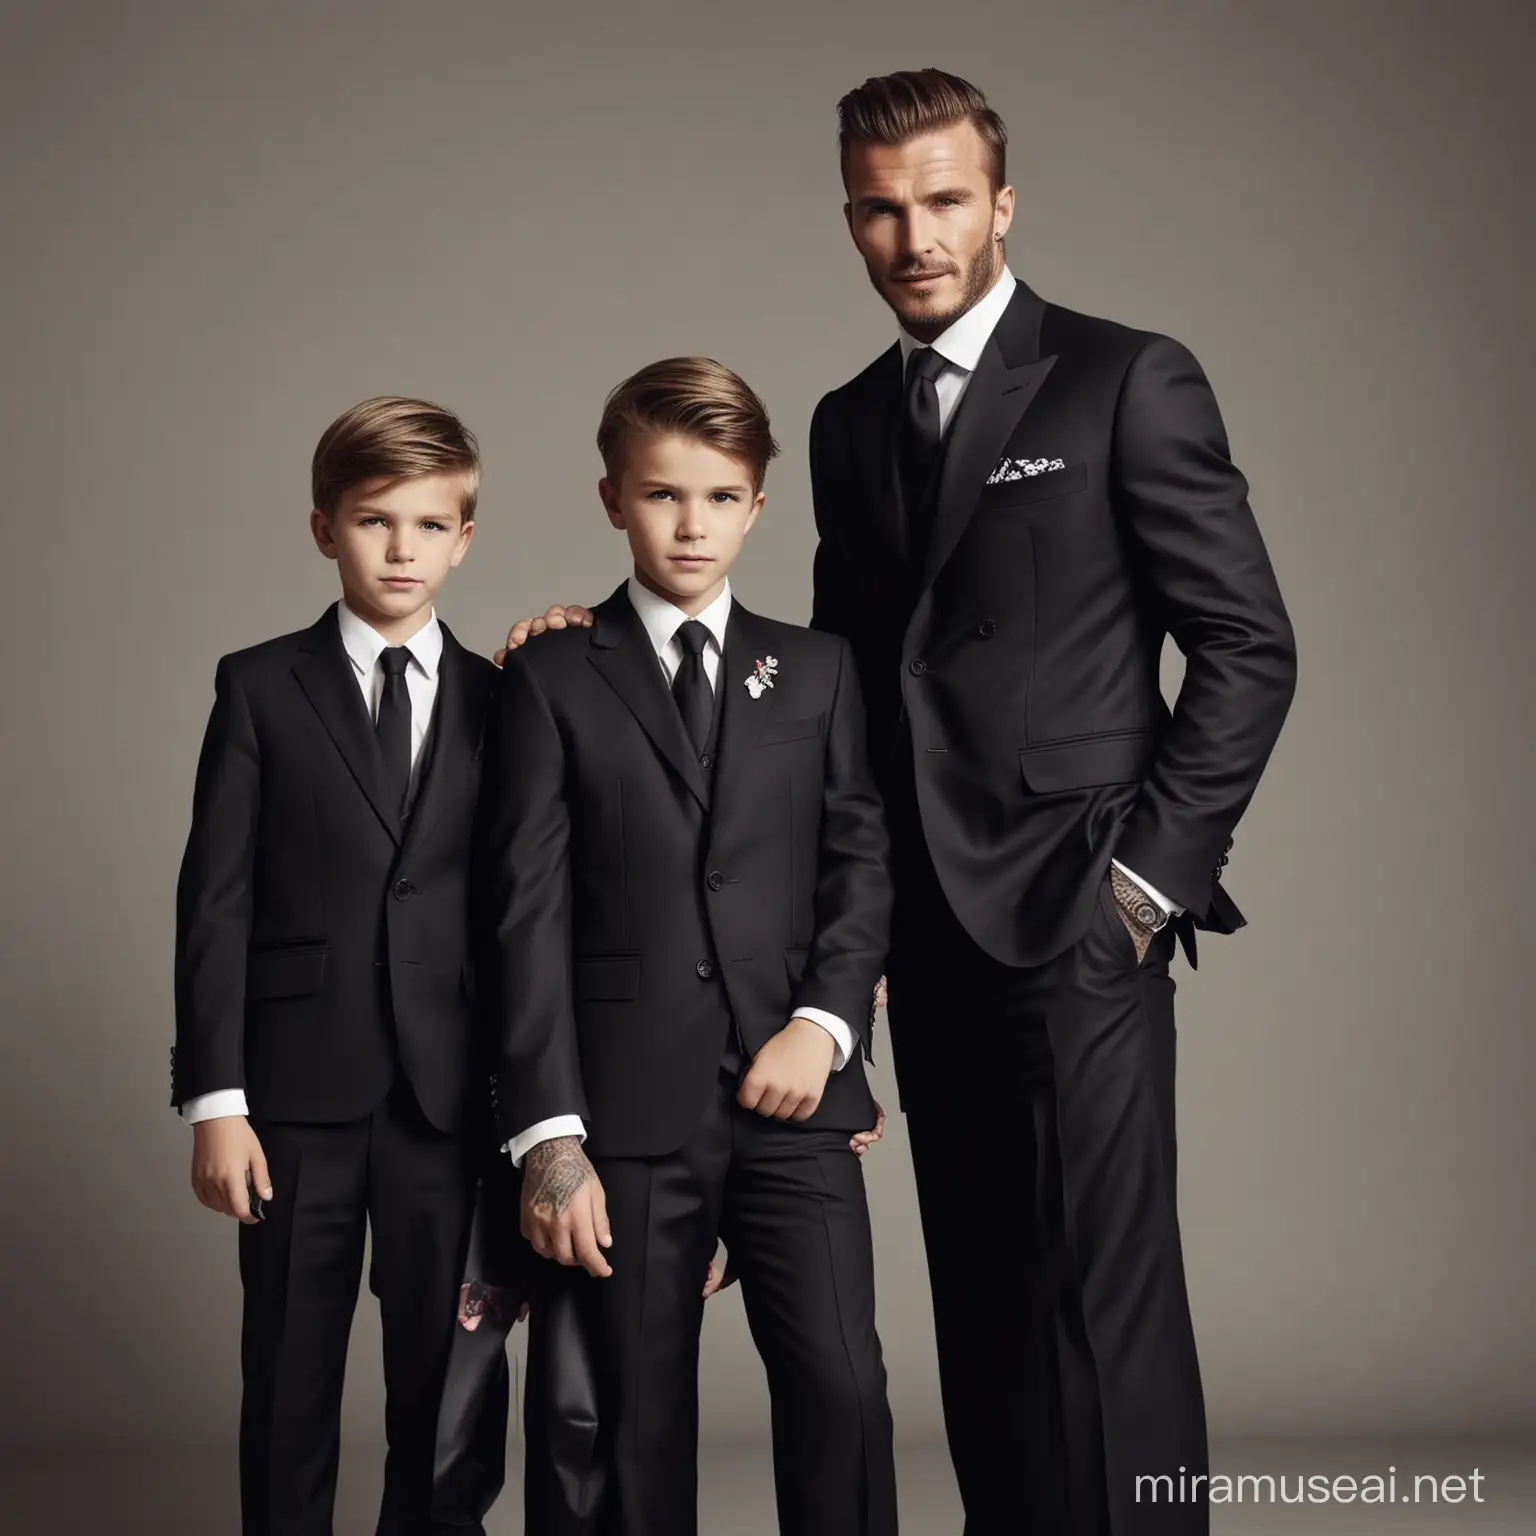 Create an image featuring david beckham and his children, both dressed in Balenciaga outfits. Ensure that the clothing reflects the brand's distinctive style while being suitable for a warm and modern family atmosphere. Showcase the special bond between father and son in this elegant representation of fashion and fatherhood.